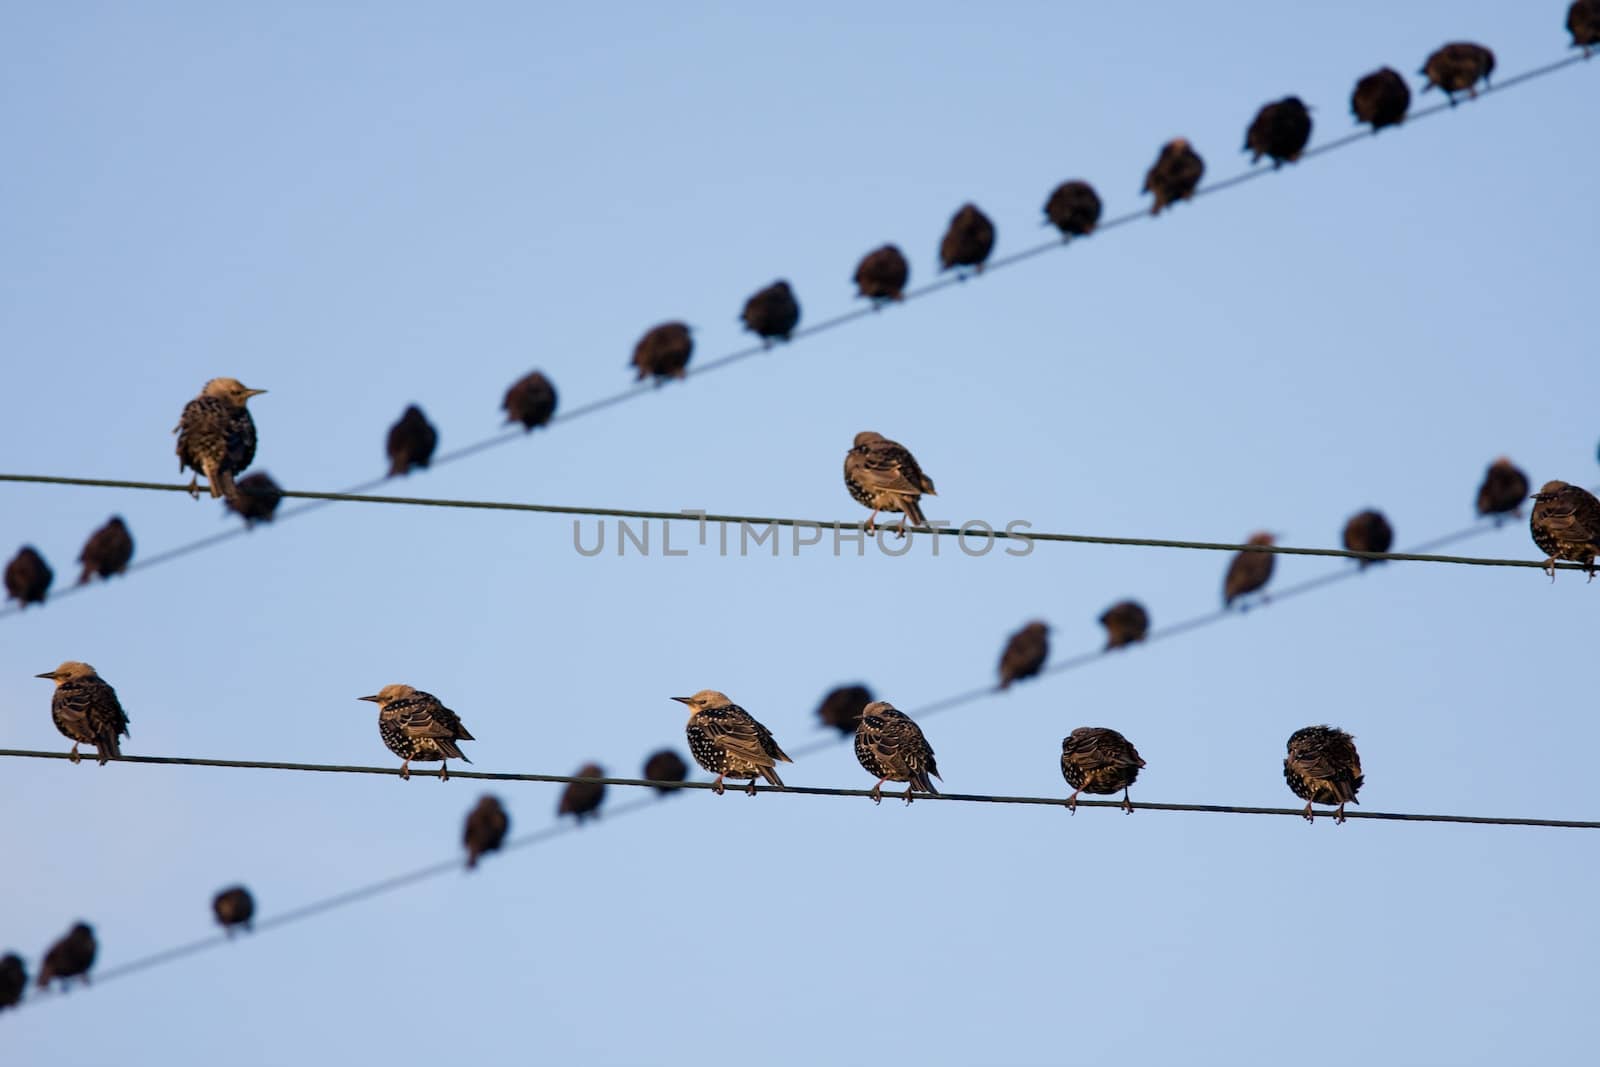 Birds on telephone lines, gathered in large groups